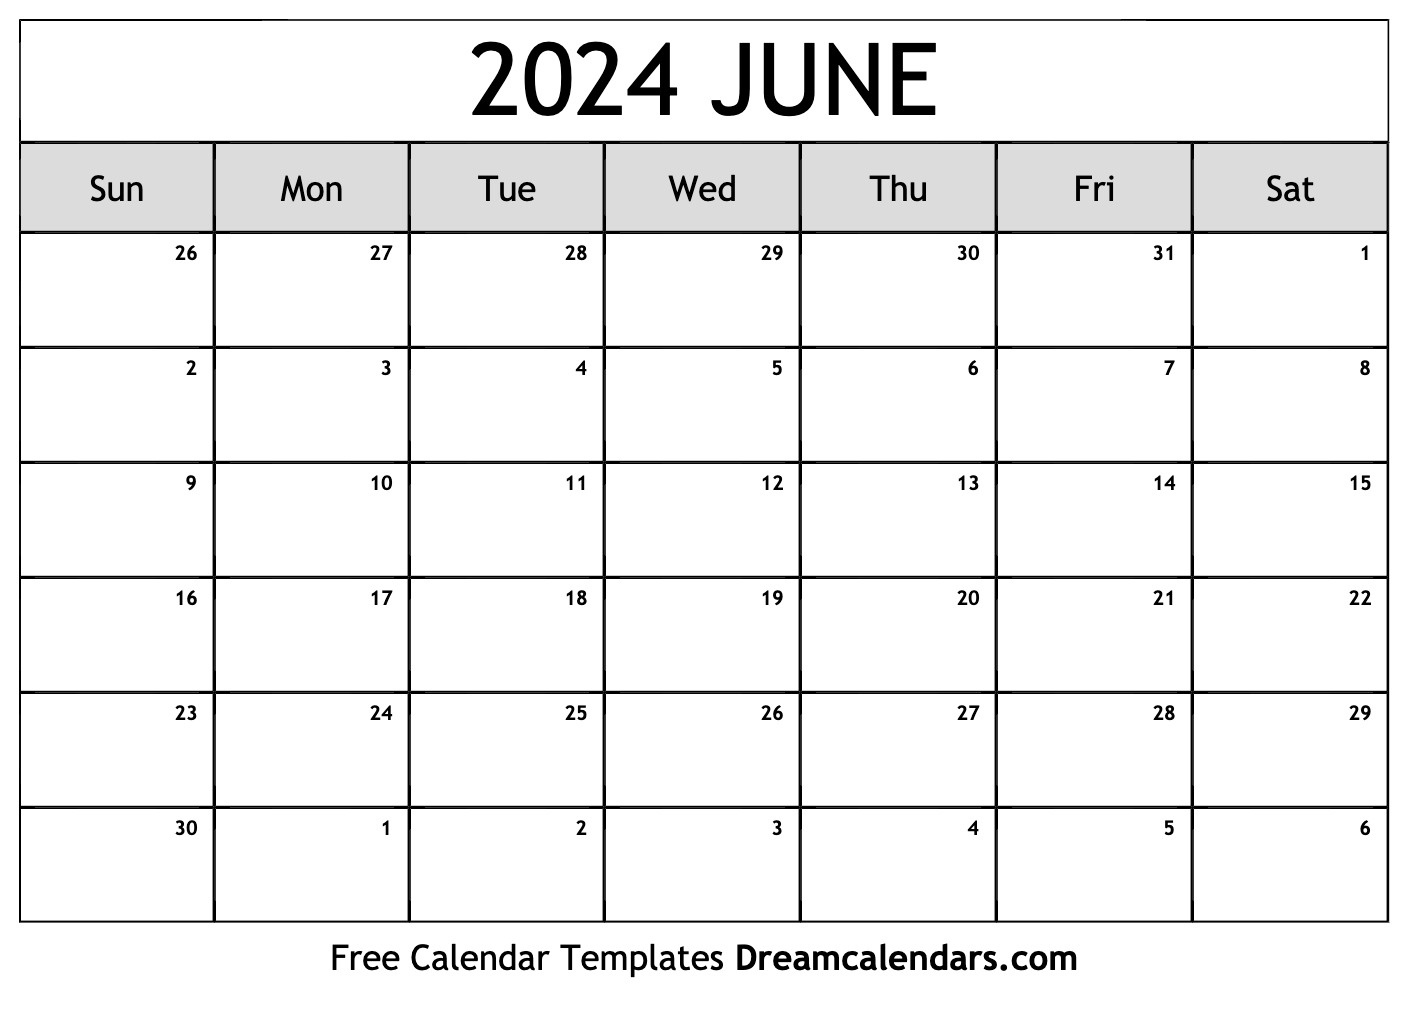 June 2024 Calendar - Free Printable With Holidays And Observances intended for June 16 2024 Calendar